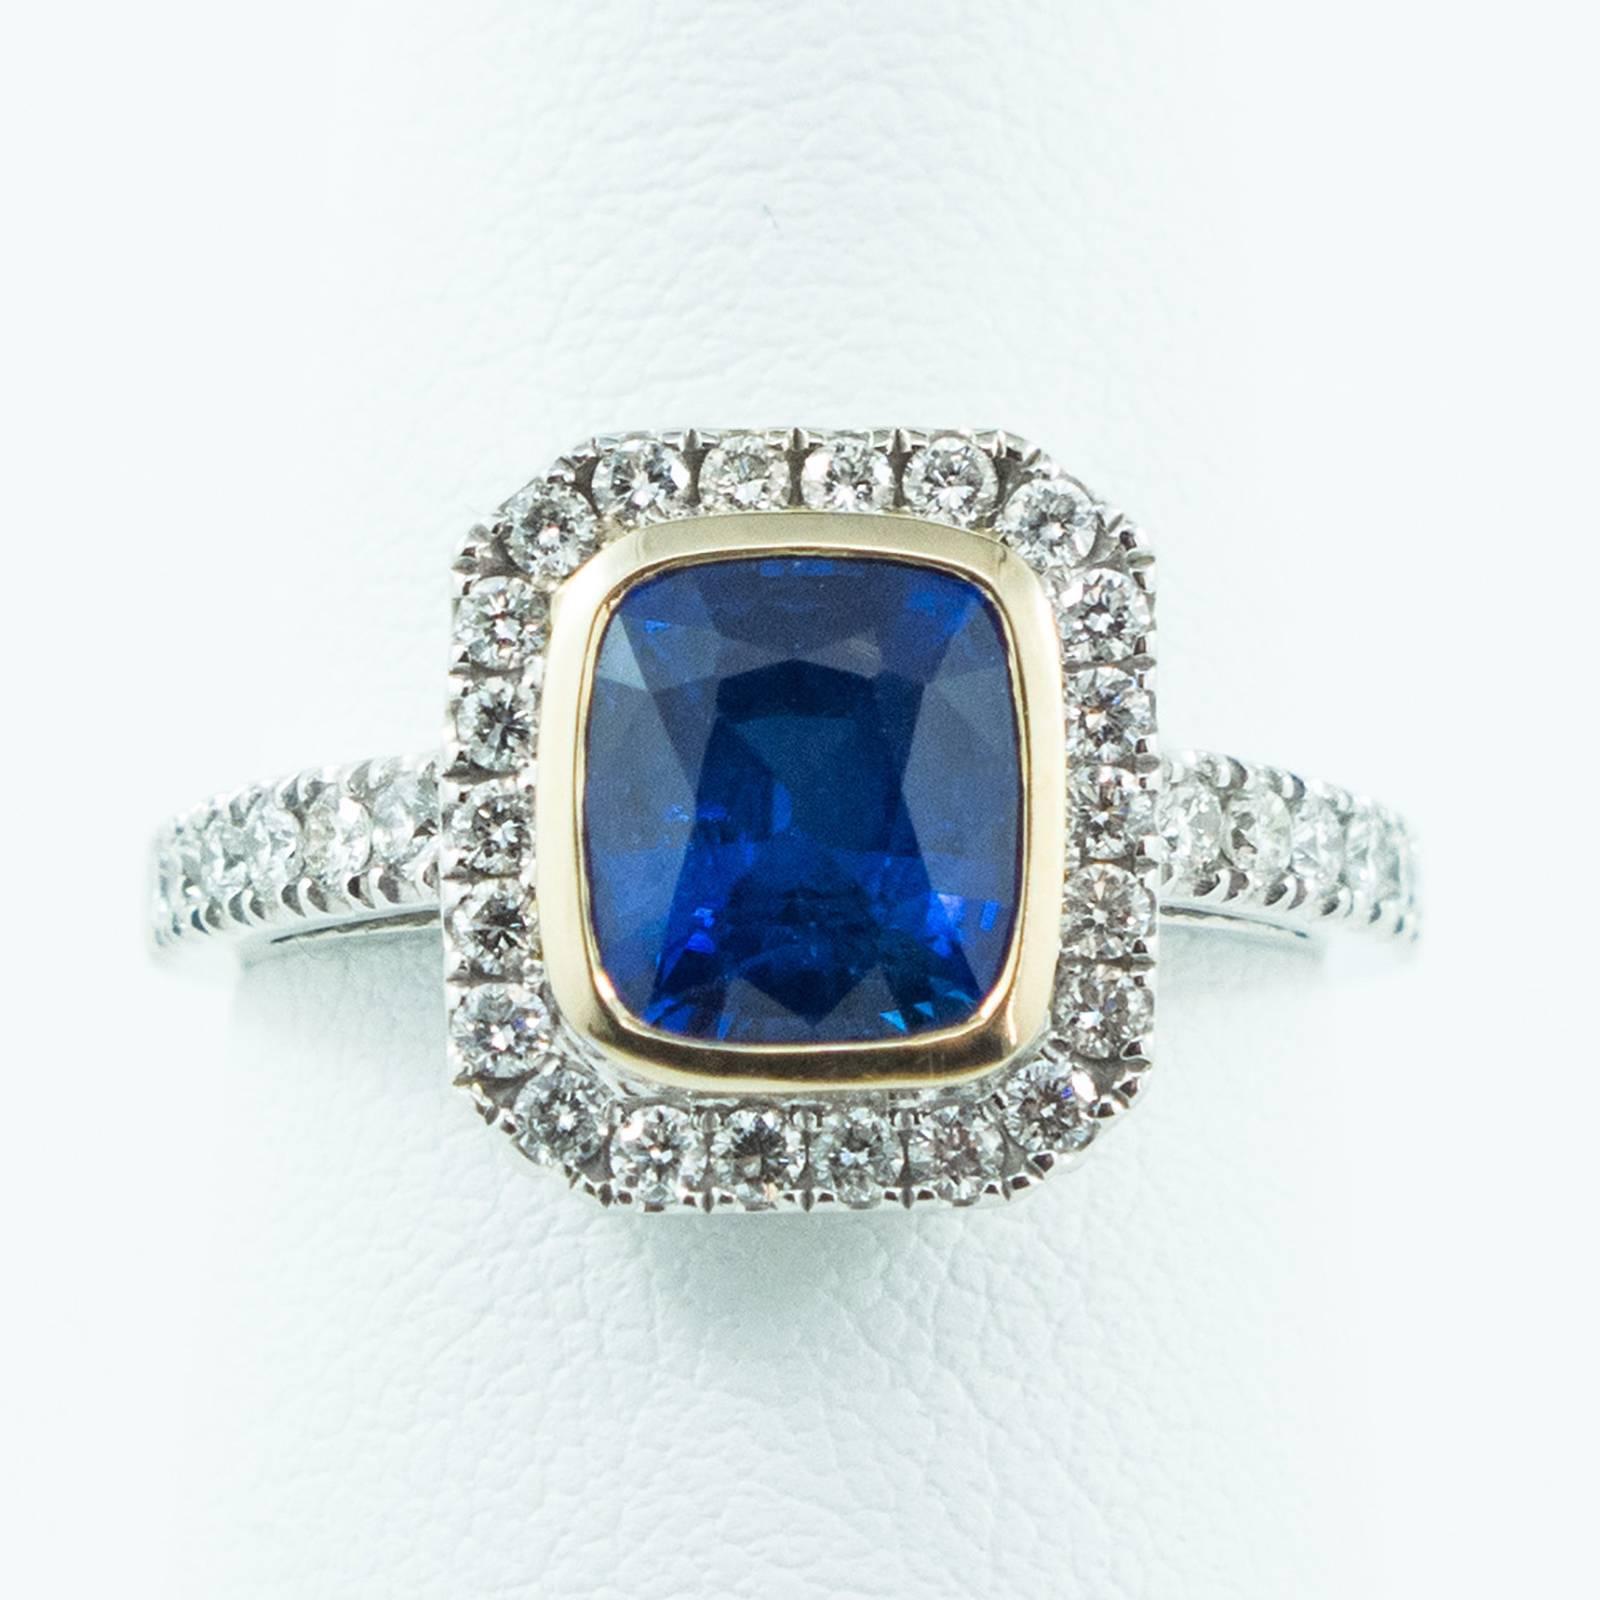 This lovely Brilliant Cut Sapphire, Diamond and Gold Ring features 36 bead set round, brilliant cut diamonds surrounding the beautiful Blue Sapphire/Corundum which is set in a yellow gold bezel.

The ring rises up 7mm off the top of your finger. It